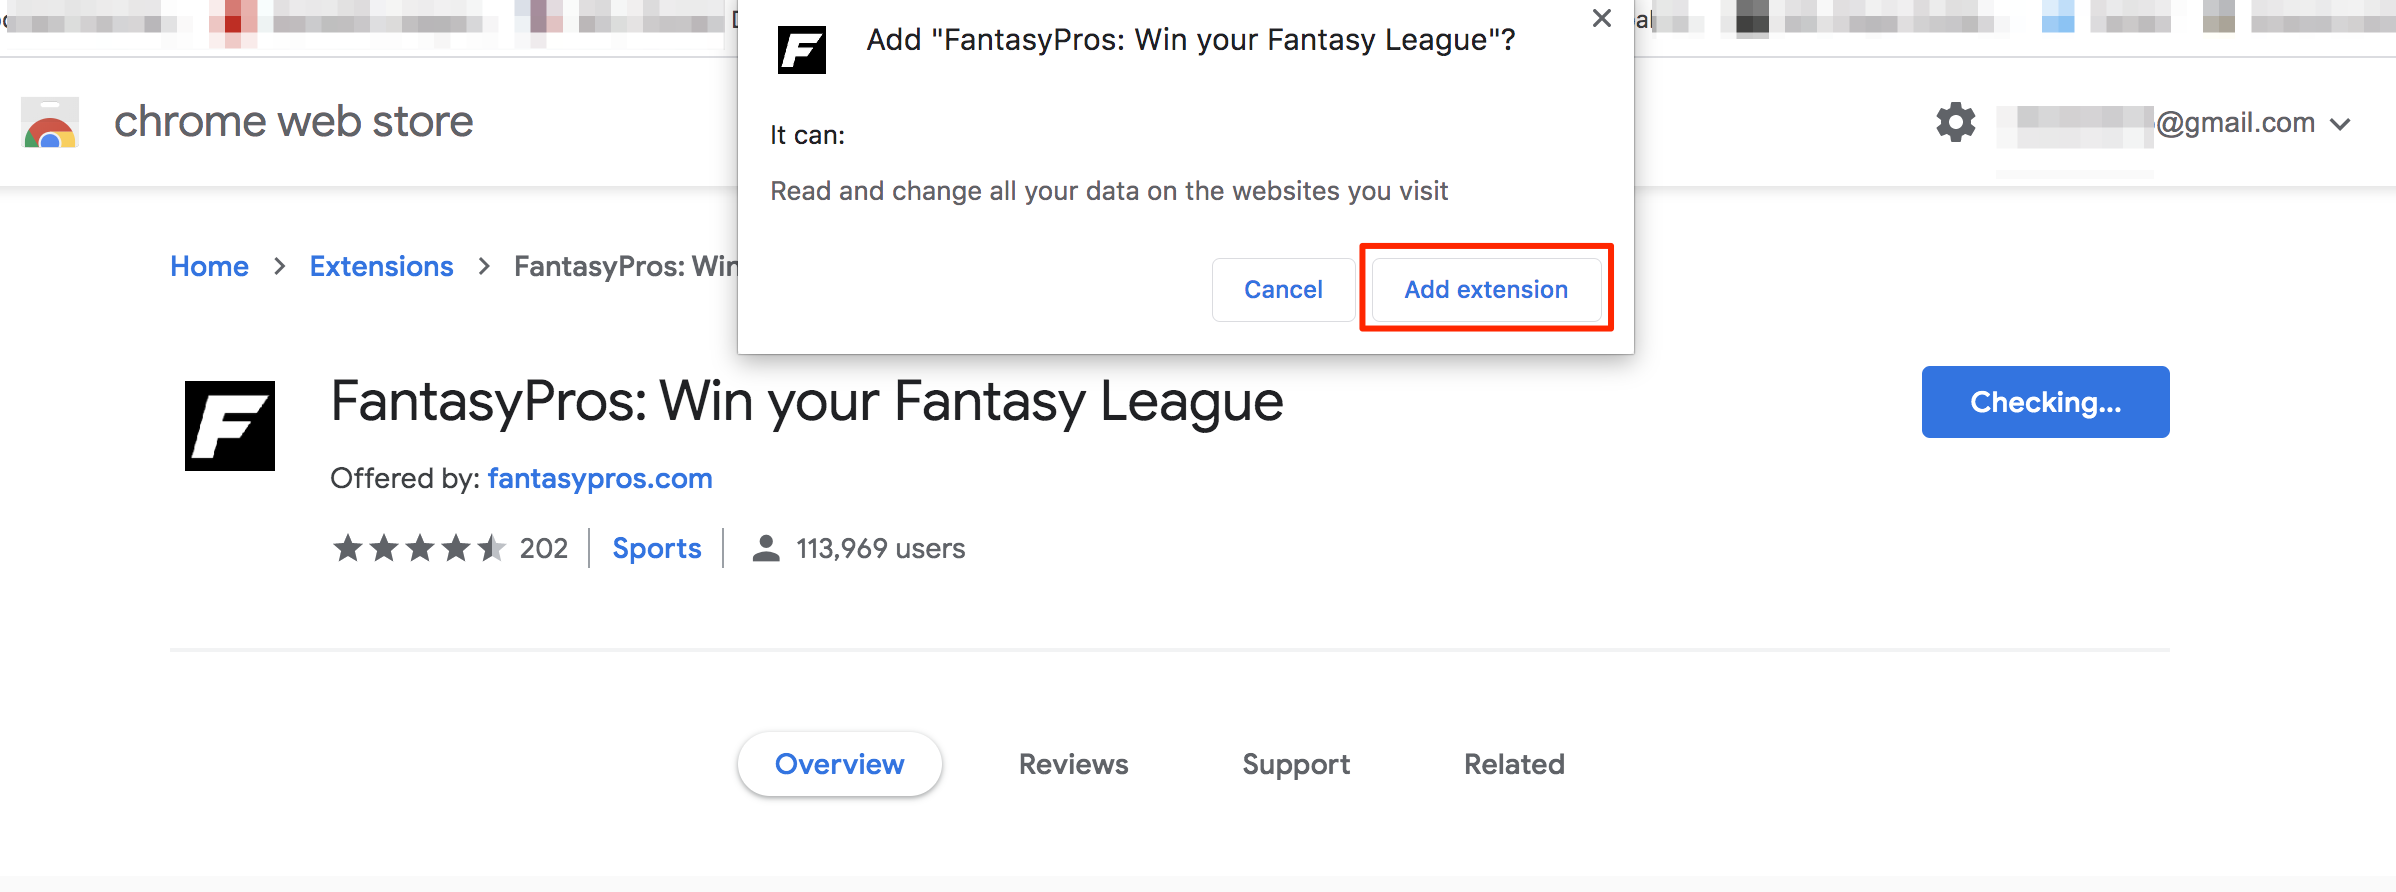 FantasyPros__Win_your_Fantasy_League_-_Chrome_Web_Store2.png